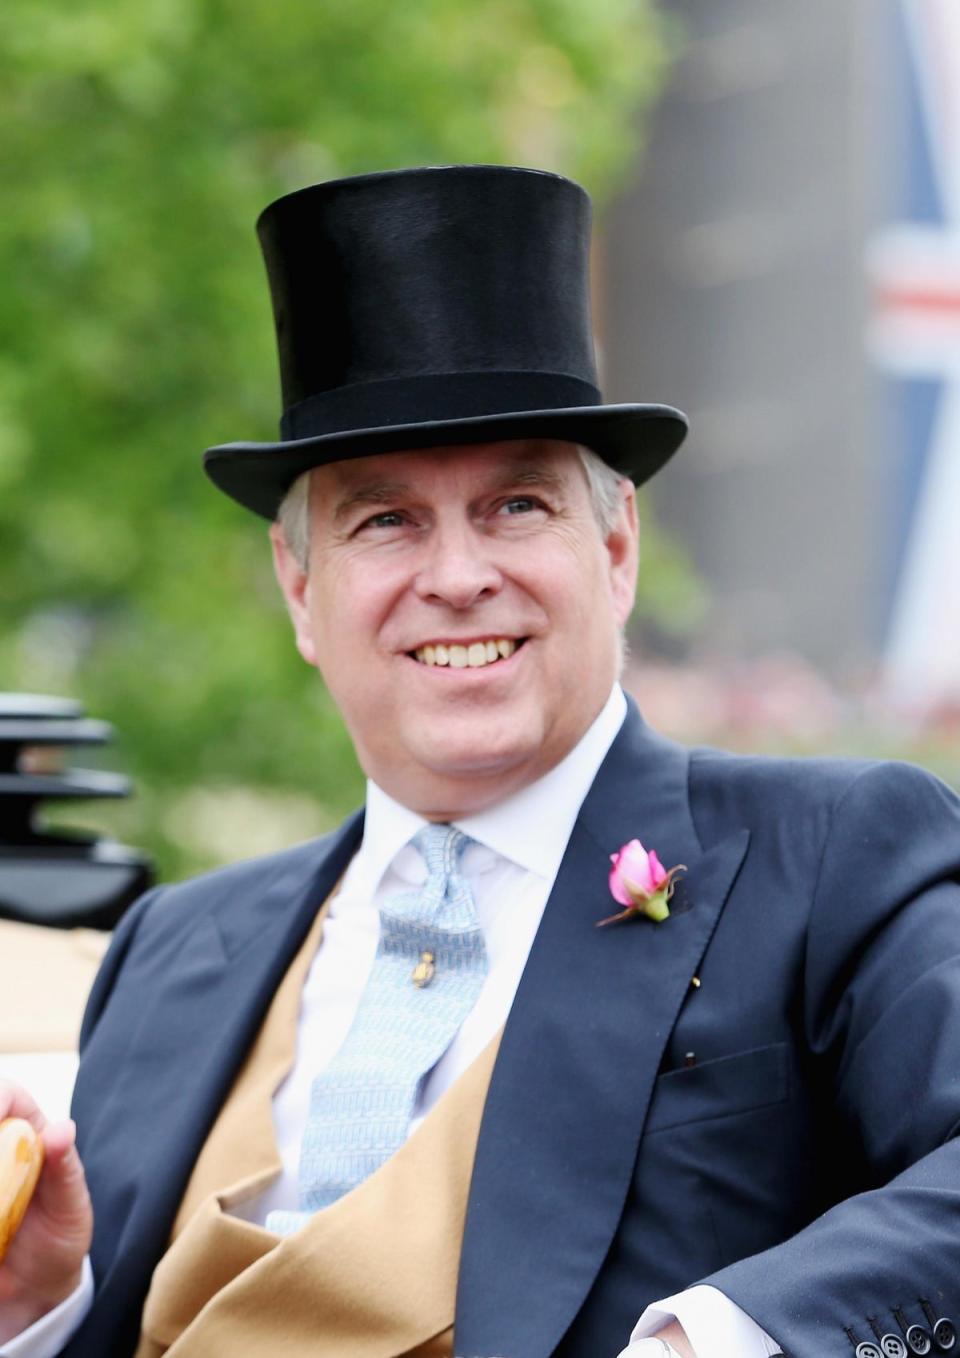 Prince Andrew may never return to public life (Getty Images)